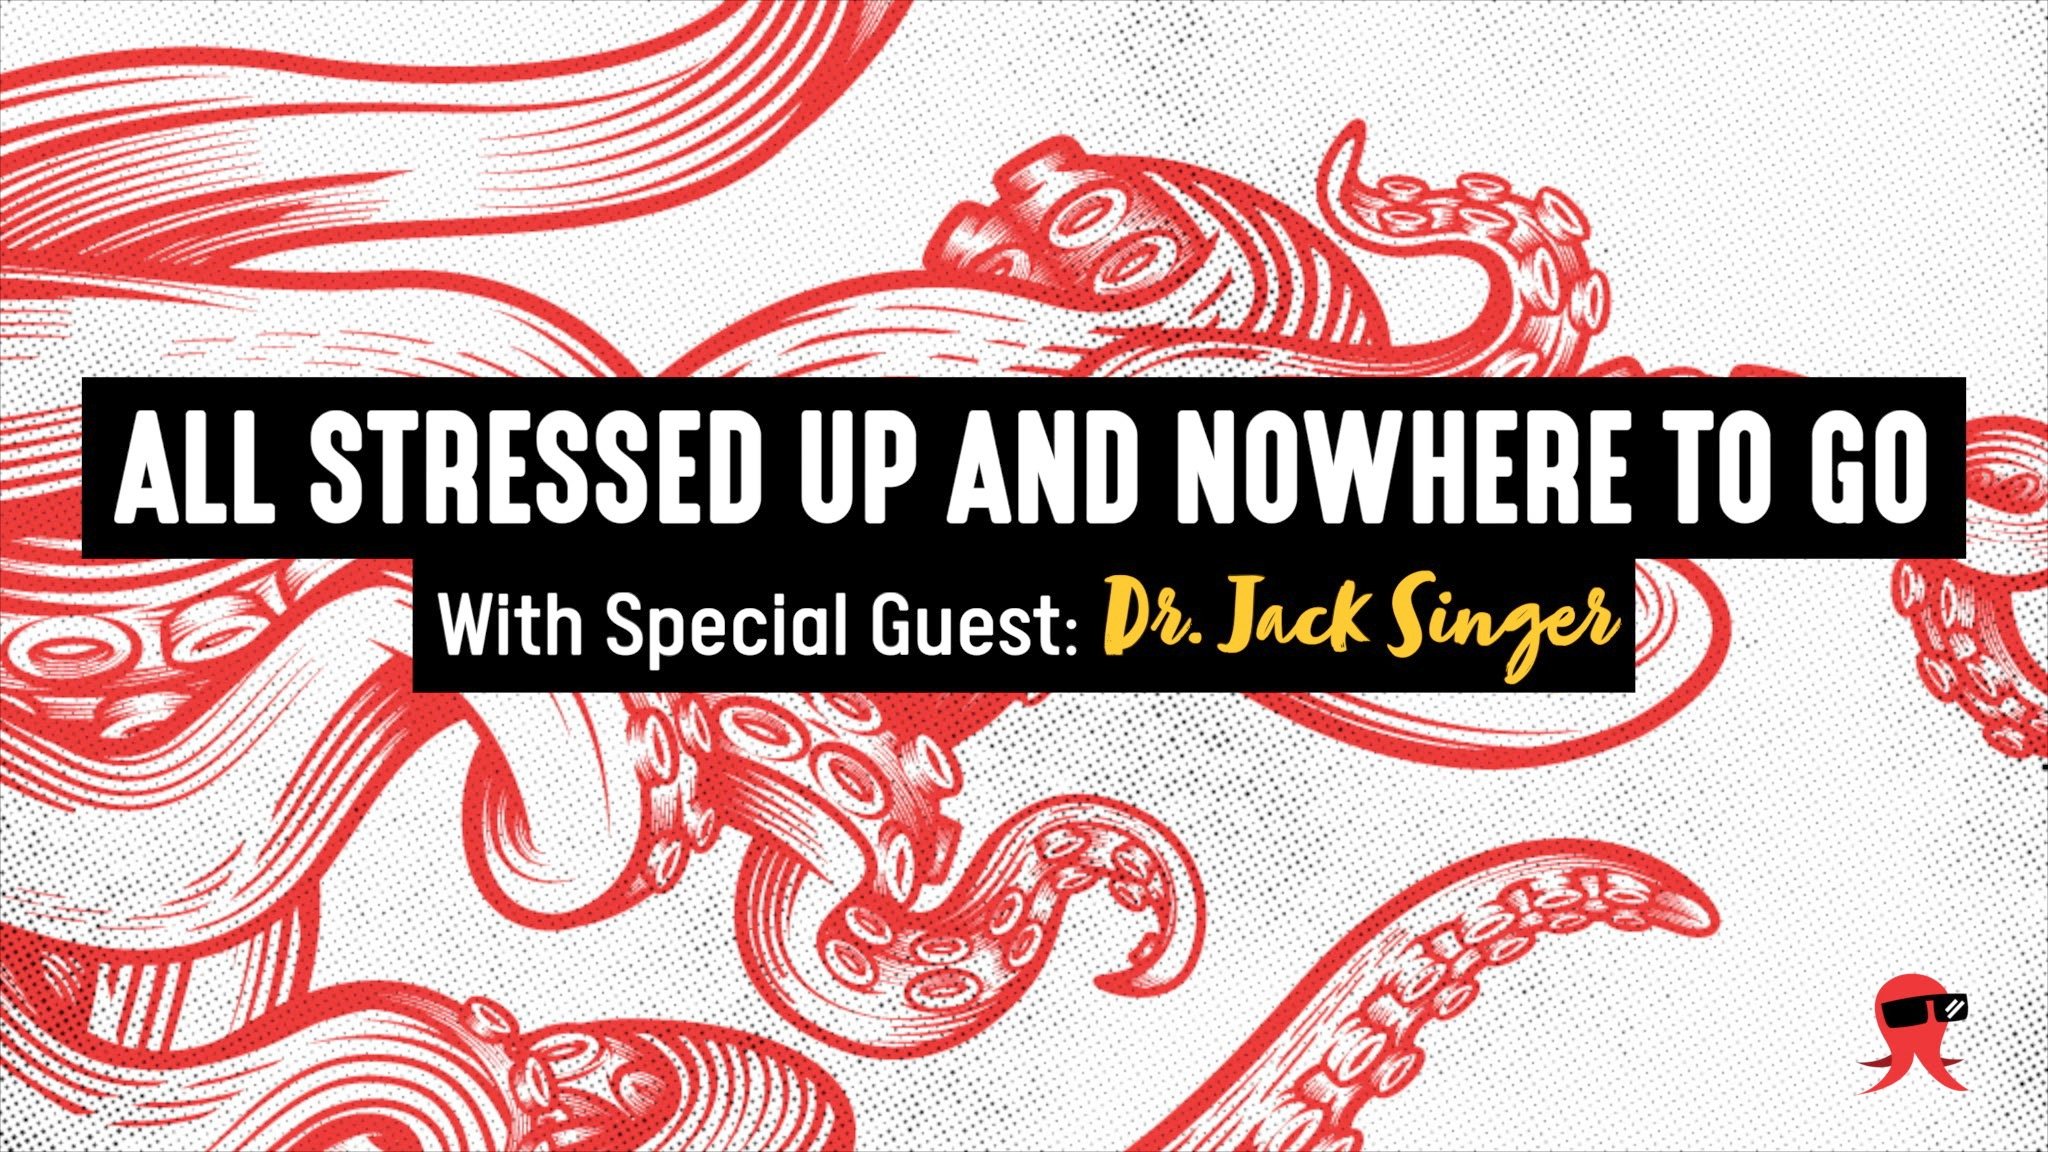 All Stressed Up and Nowhere to Go With Special Guest: Dr. Jack Singer